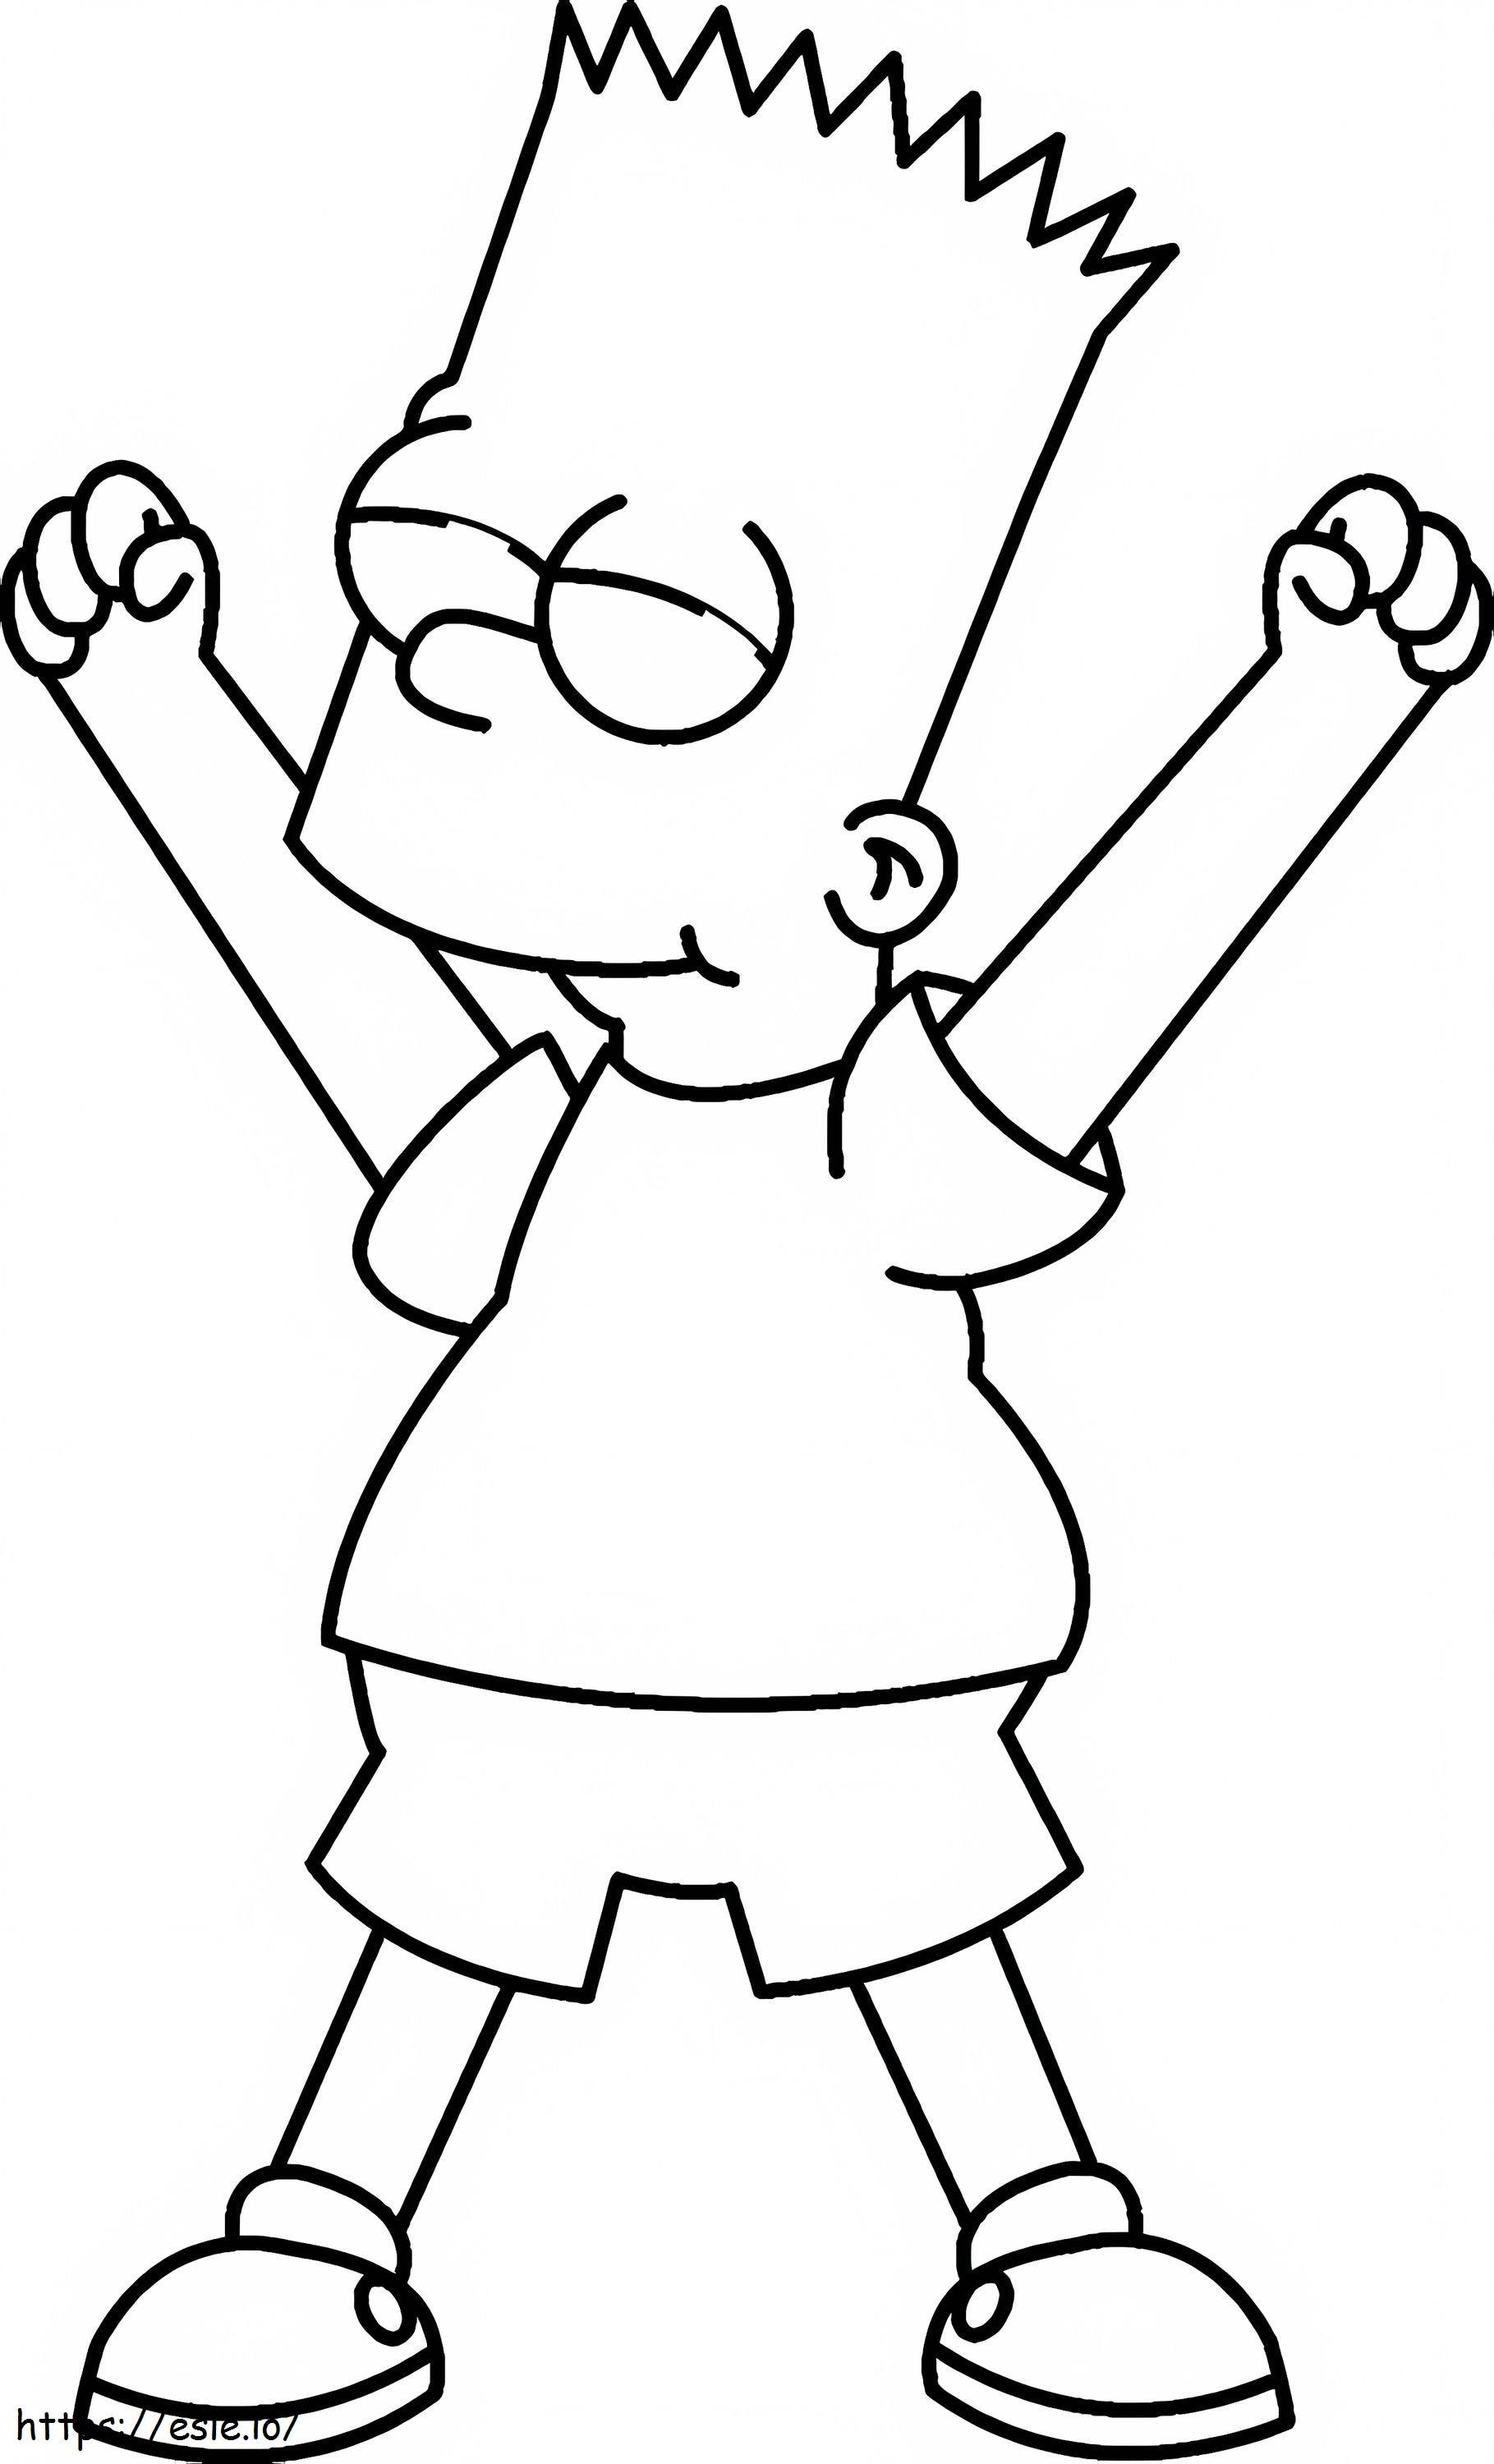 Free Bart Simpson coloring page